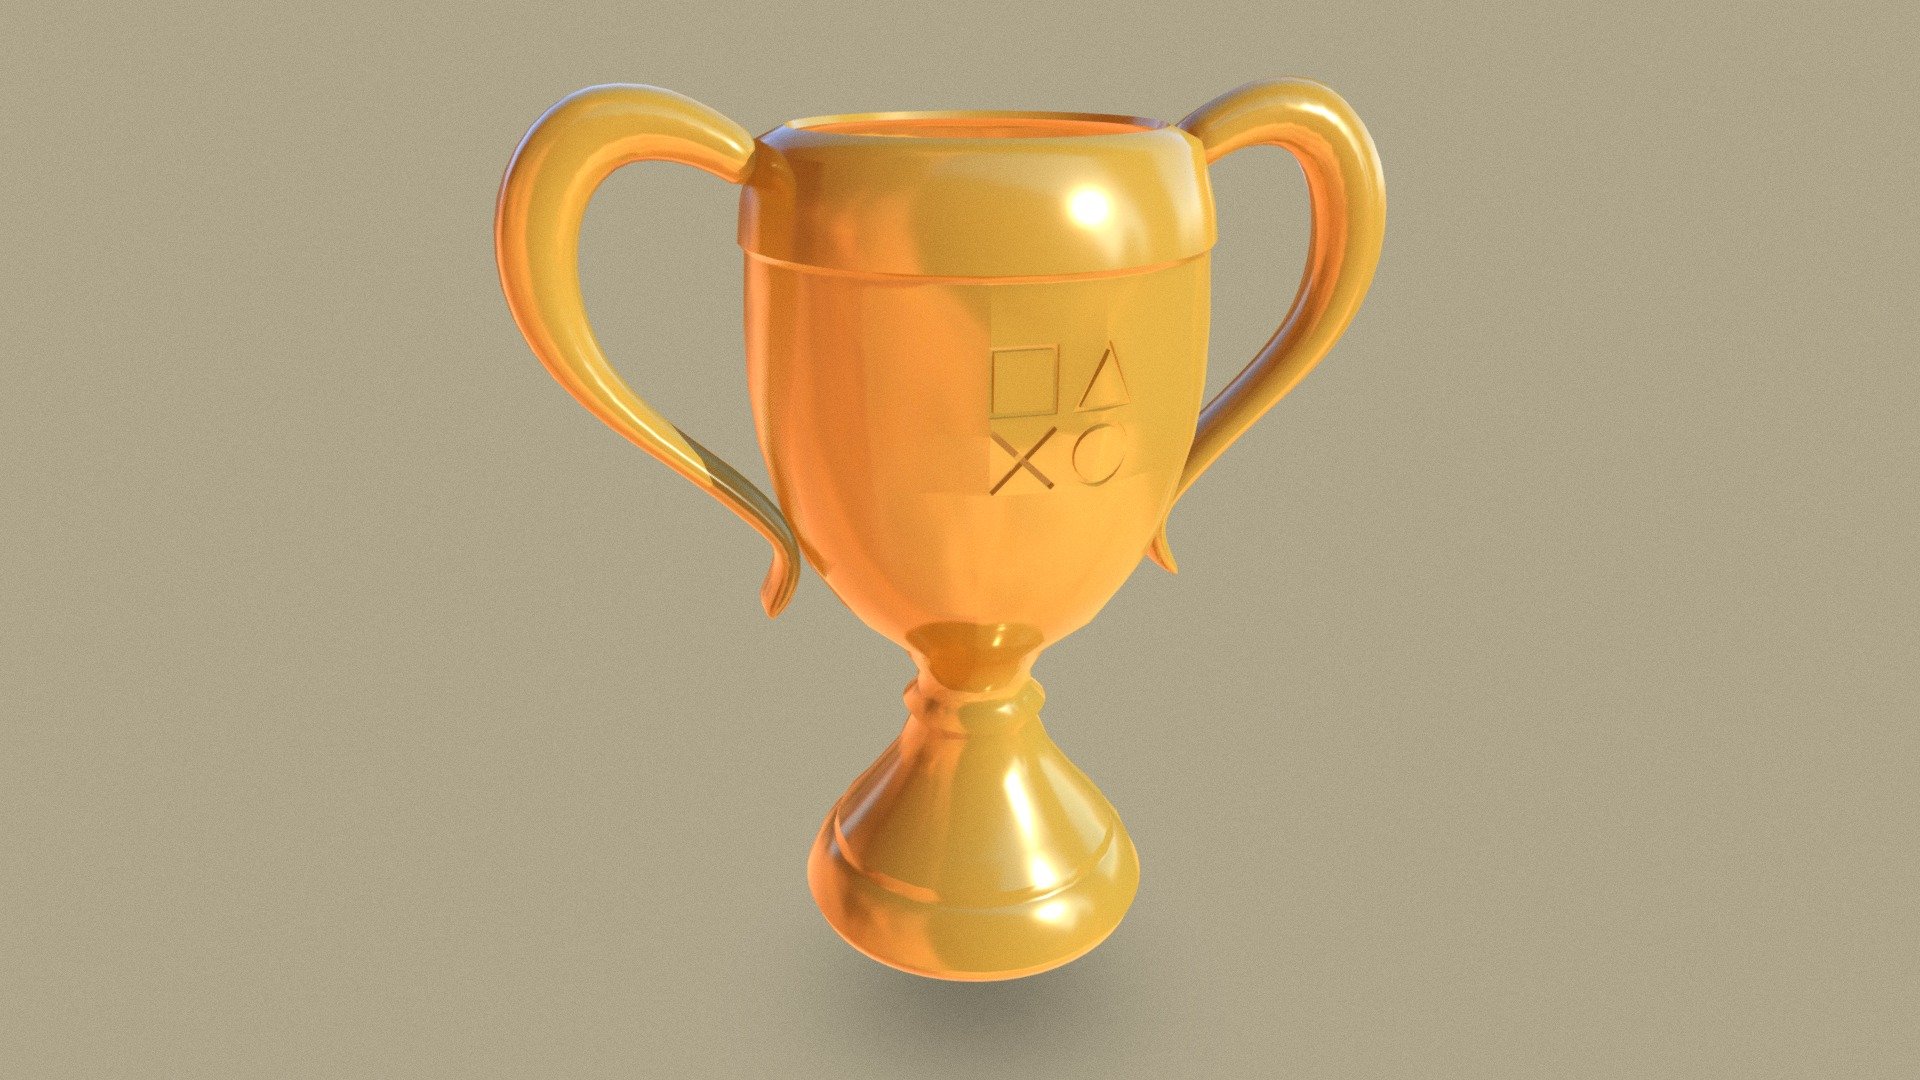 [Low Poly] Playstation Trophy